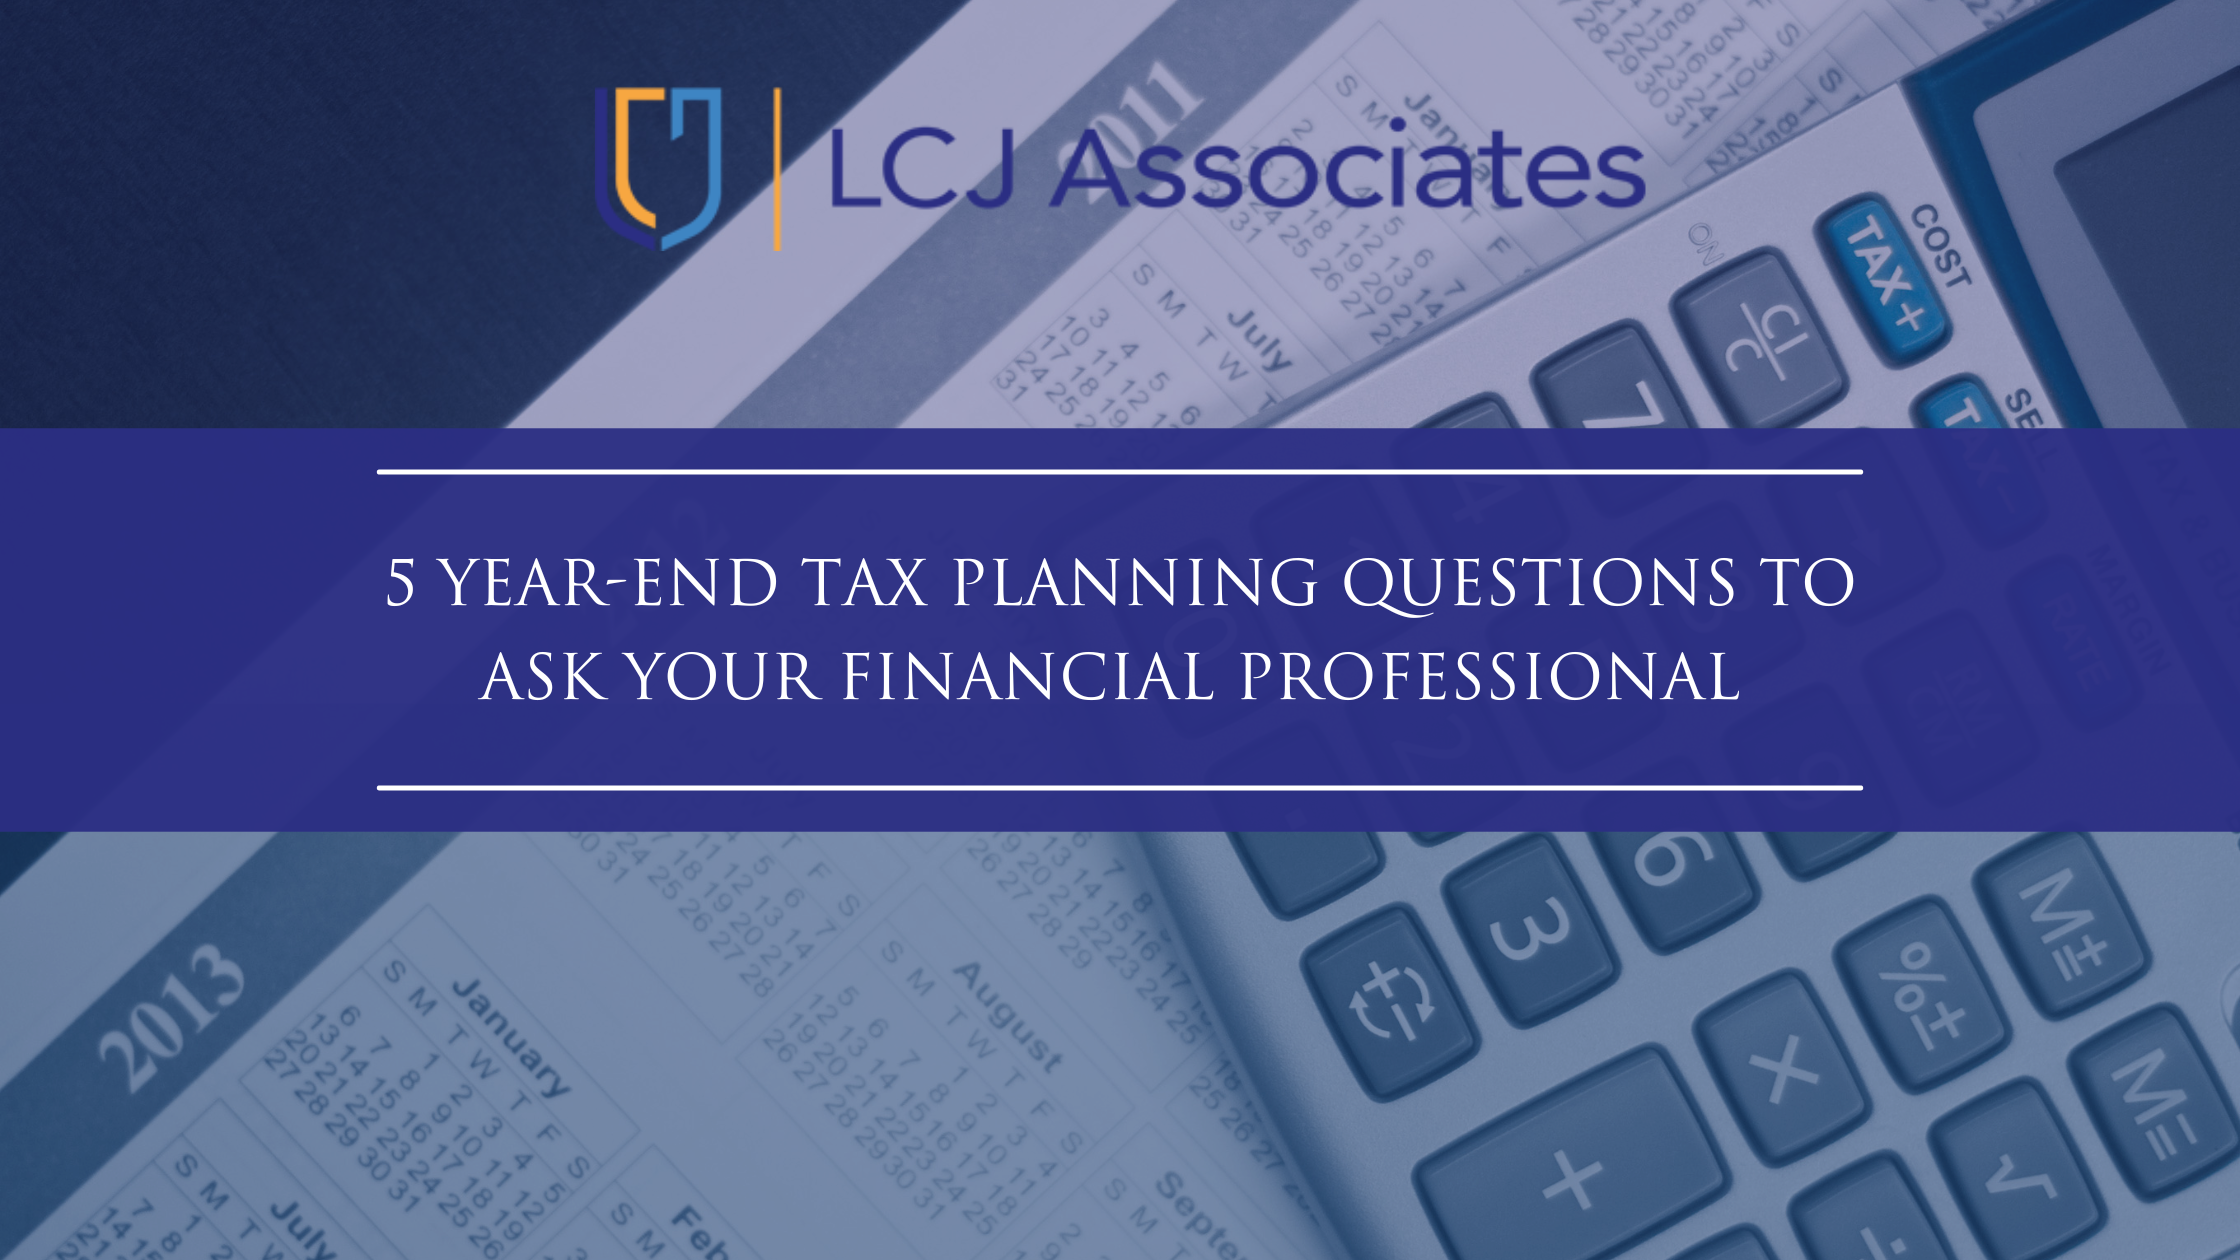 5 Year-End Tax Planning Questions to Ask Your Financial Professional